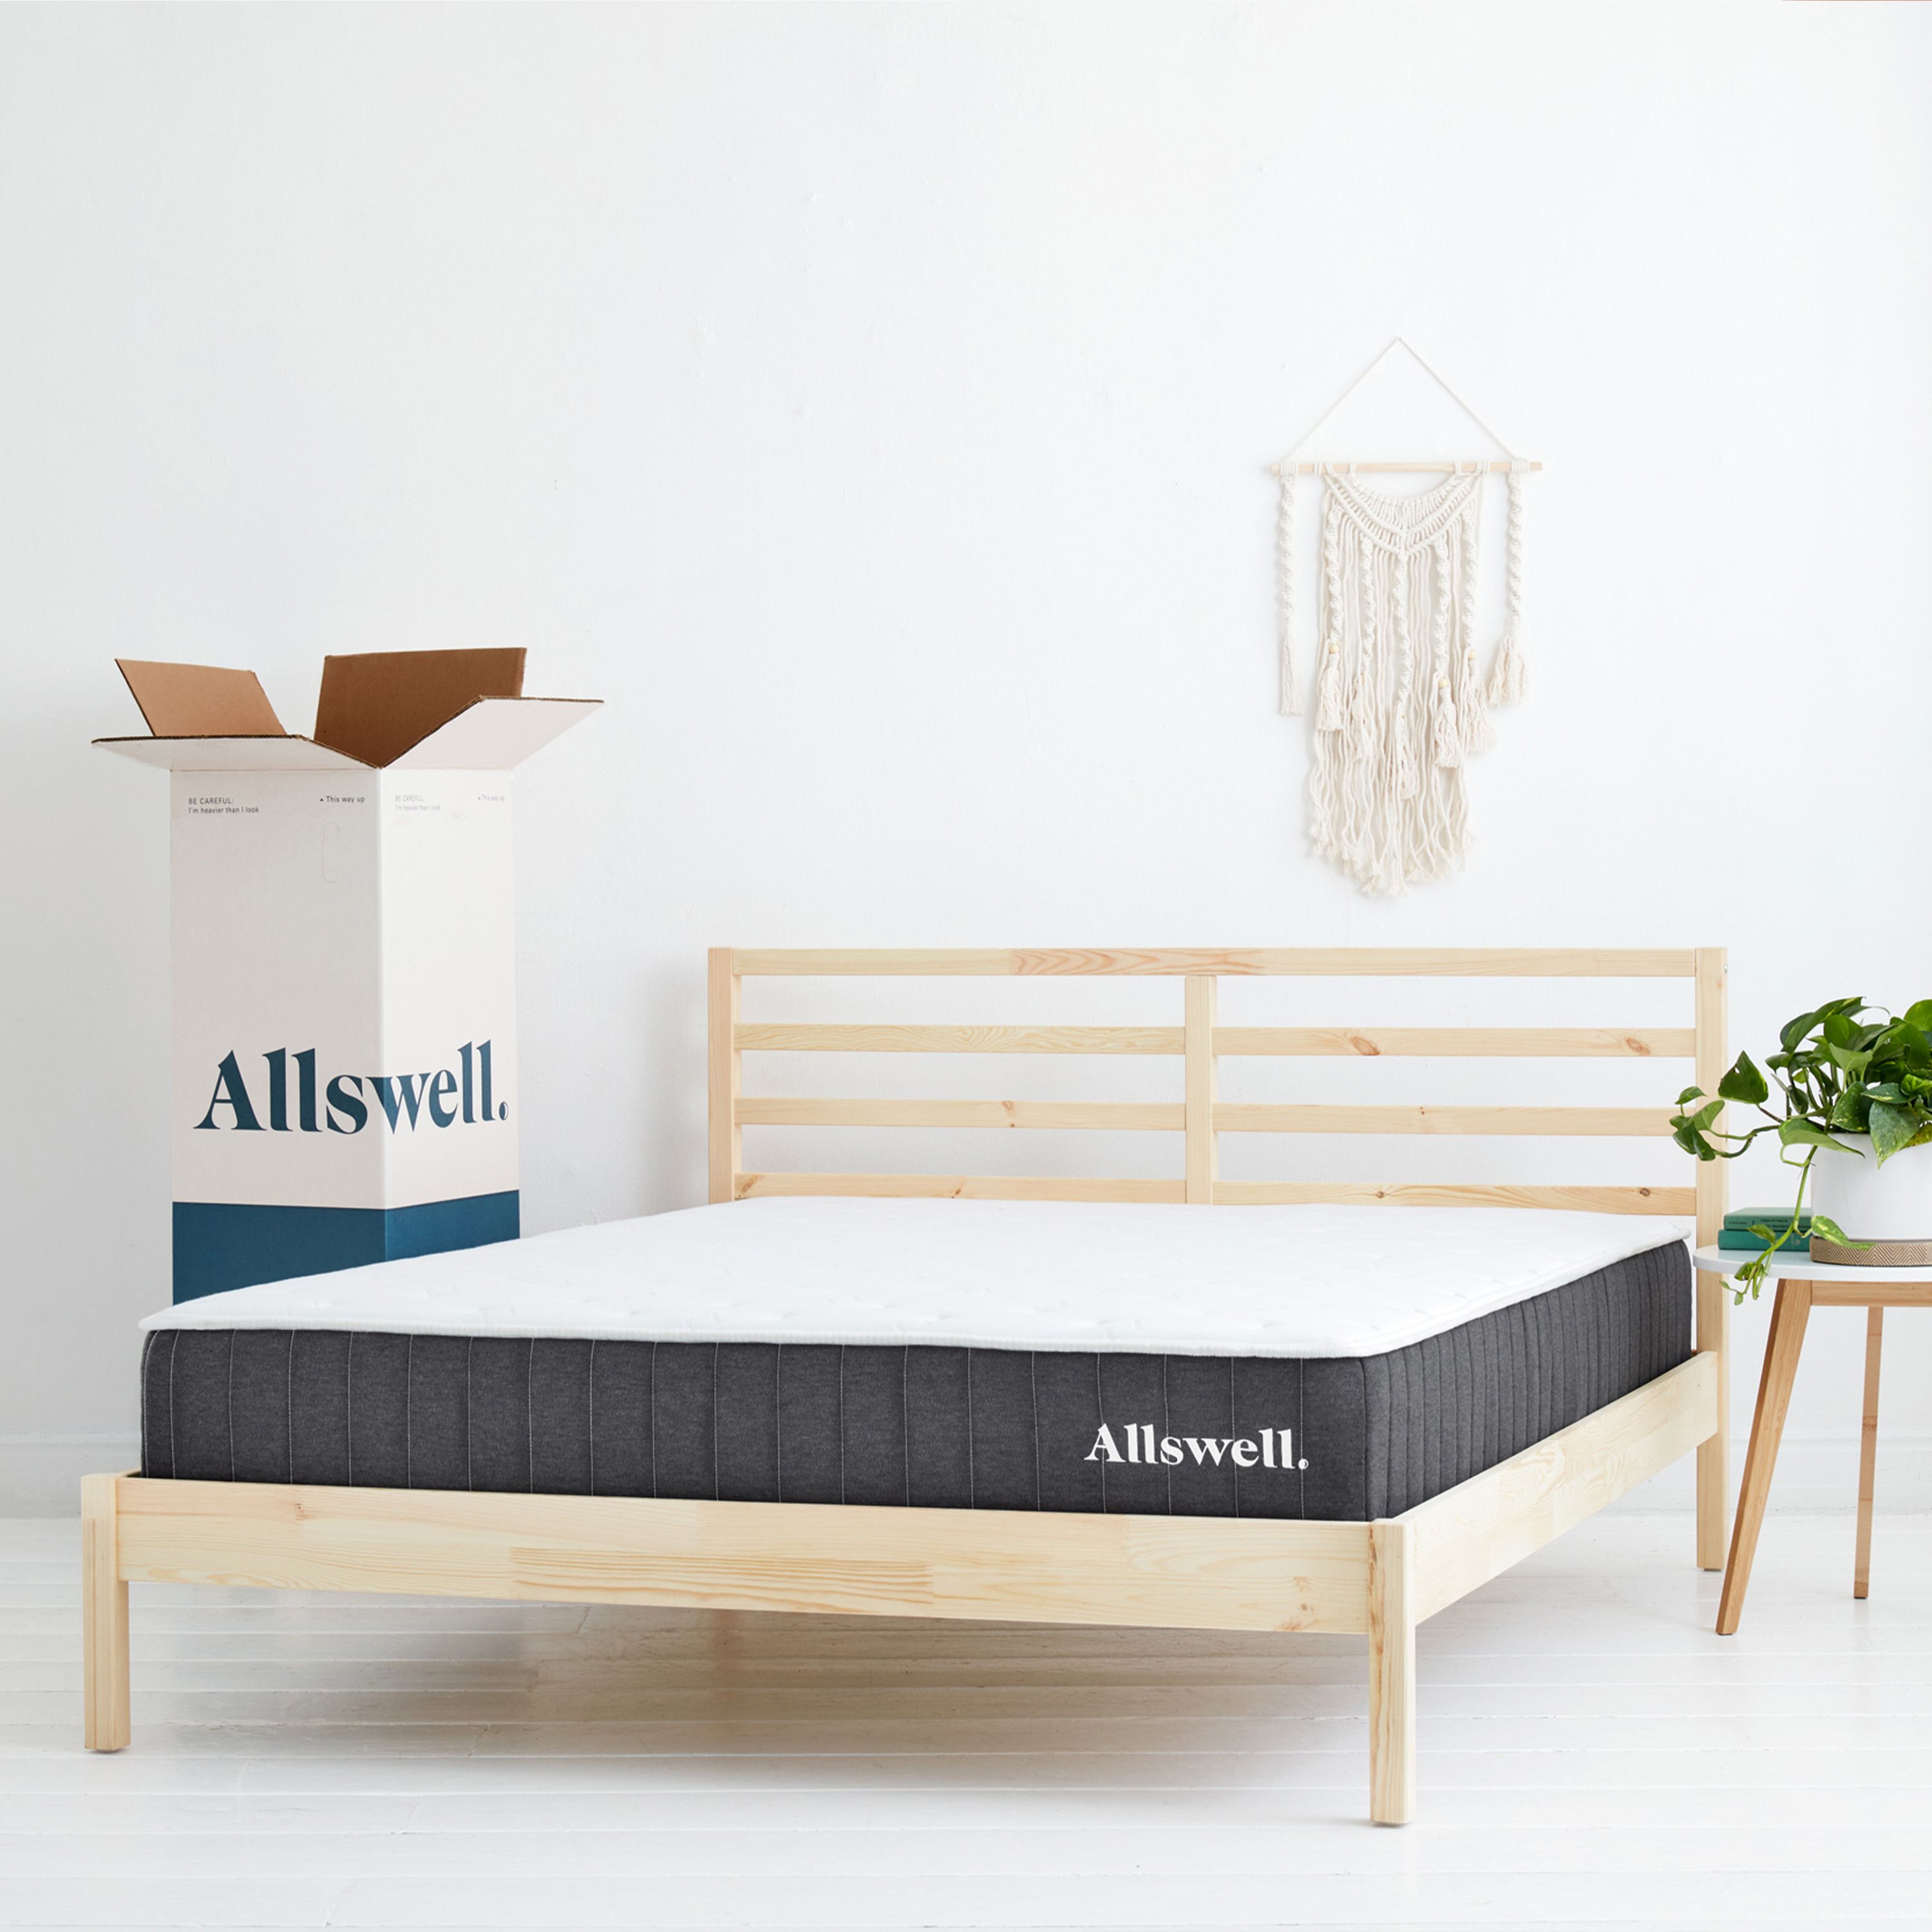 The Allswell 10